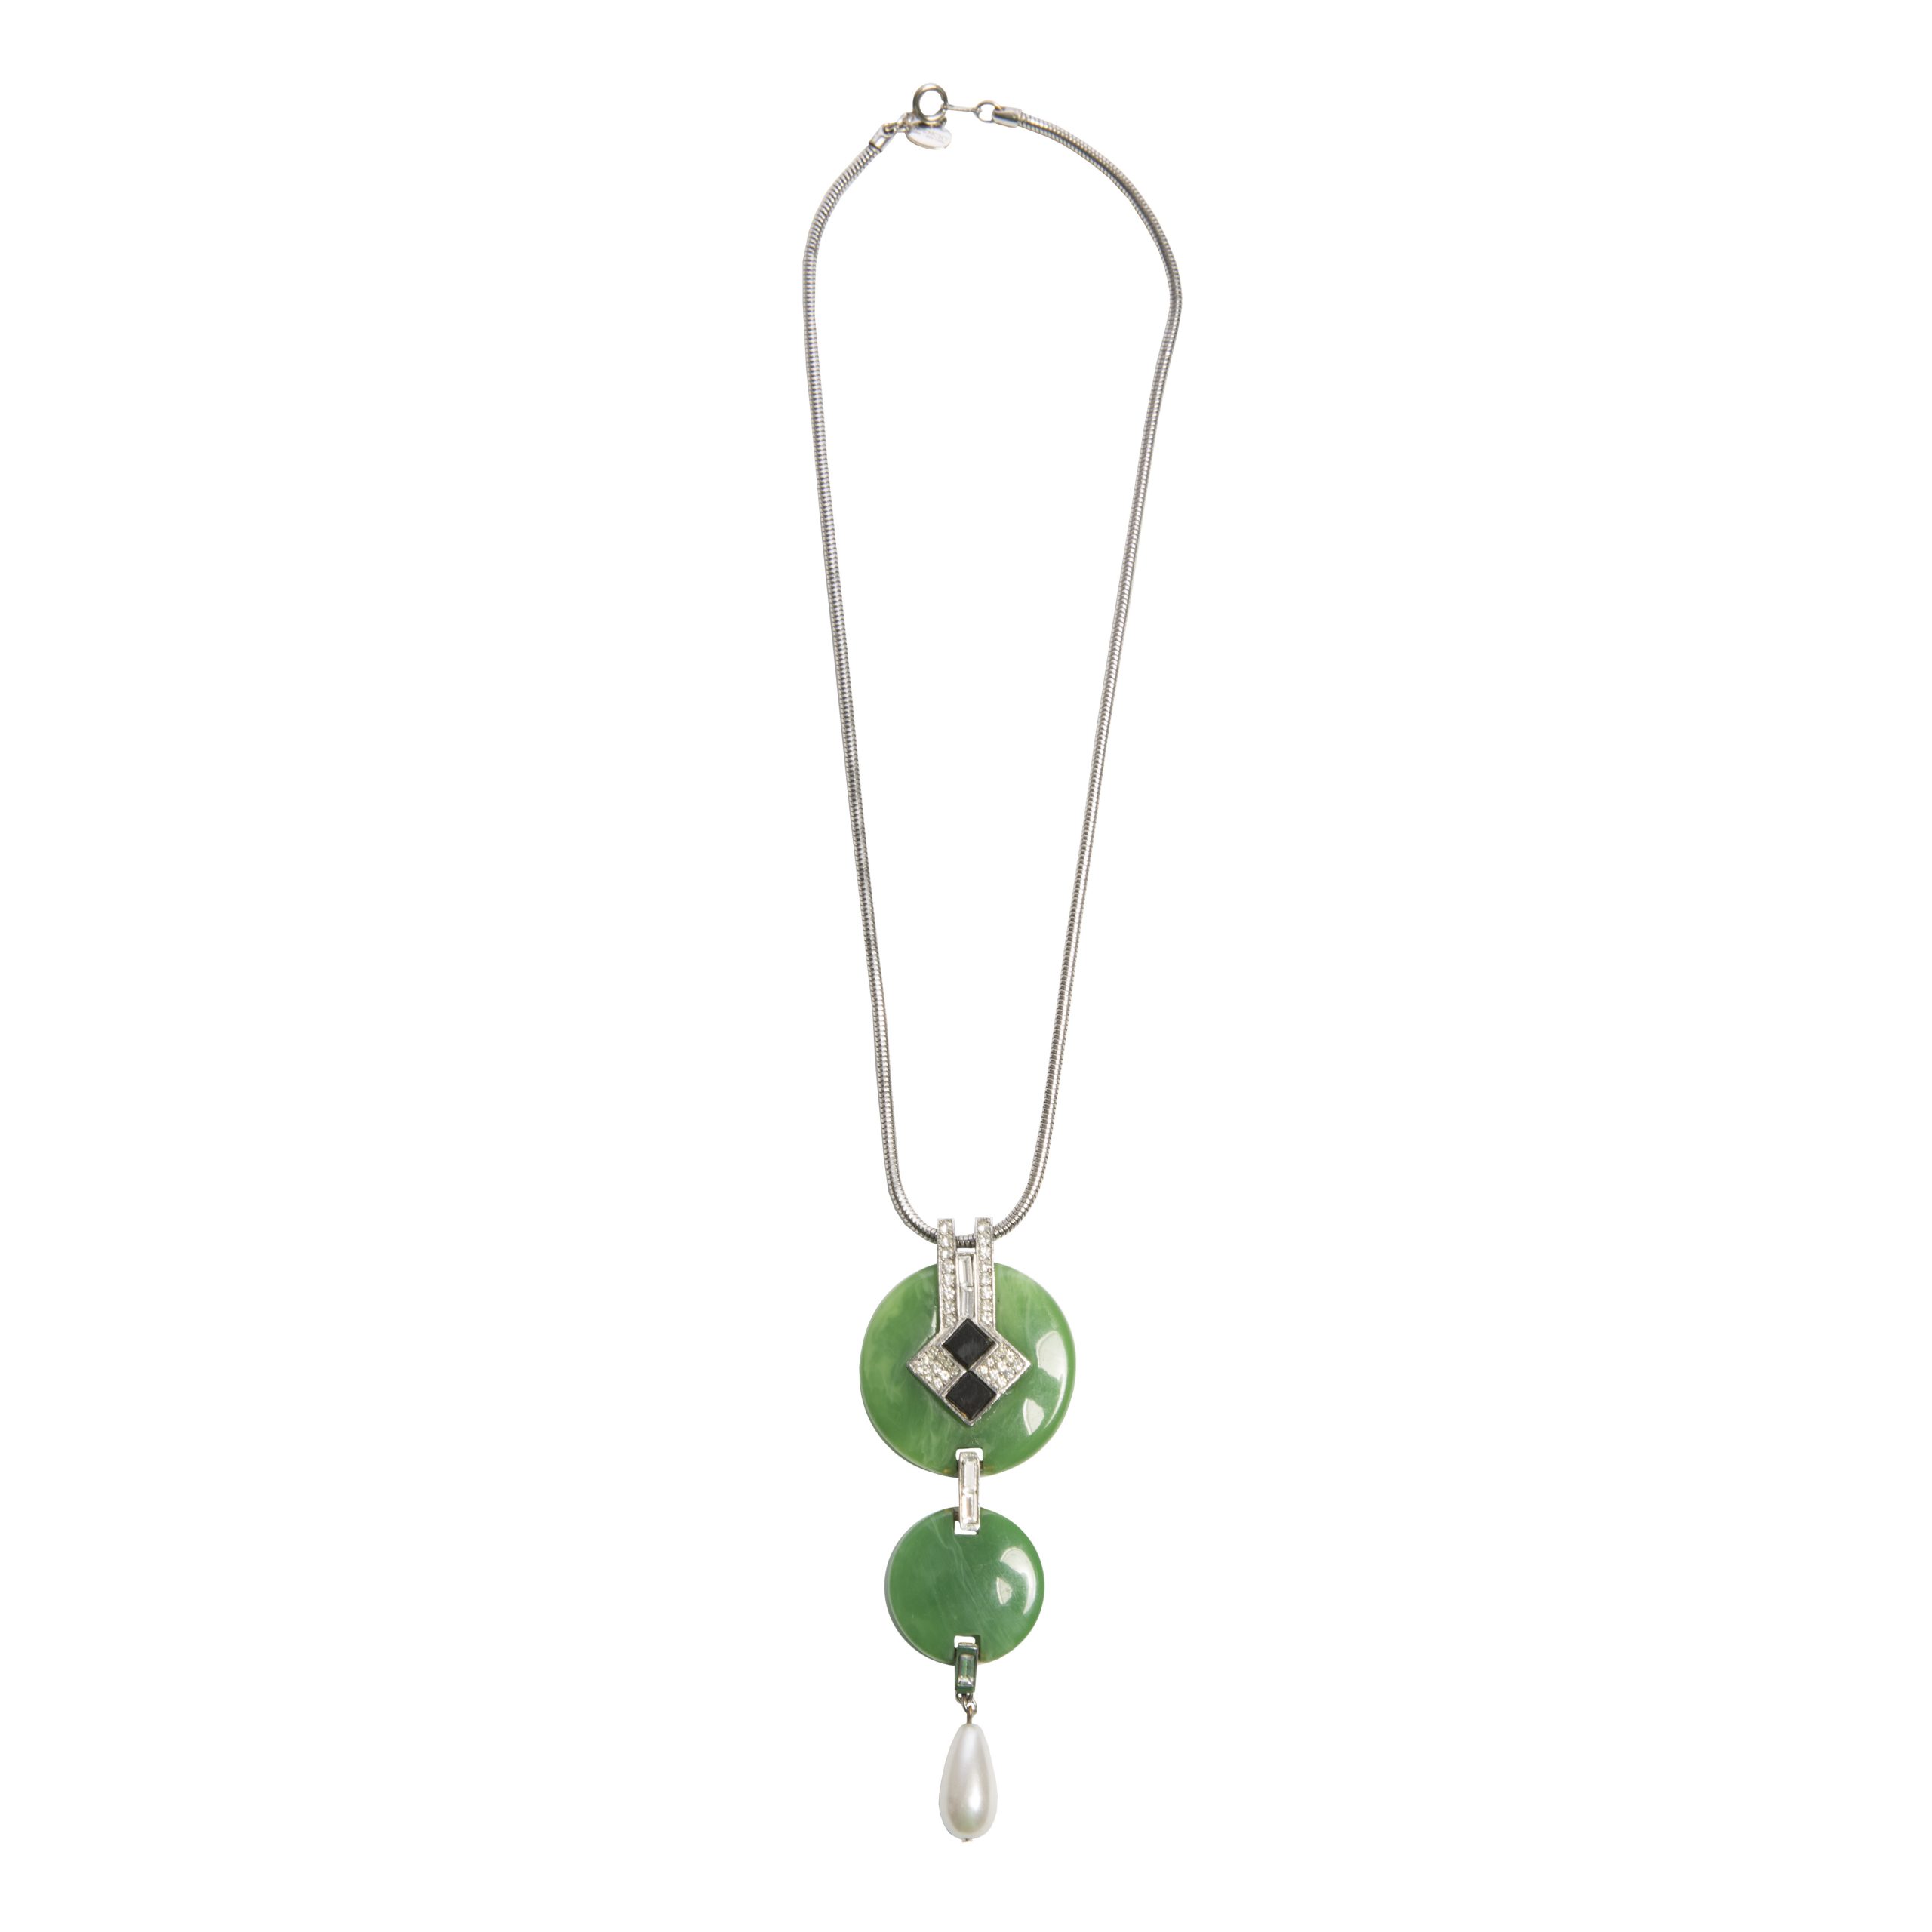 Vintage green stone silver necklace